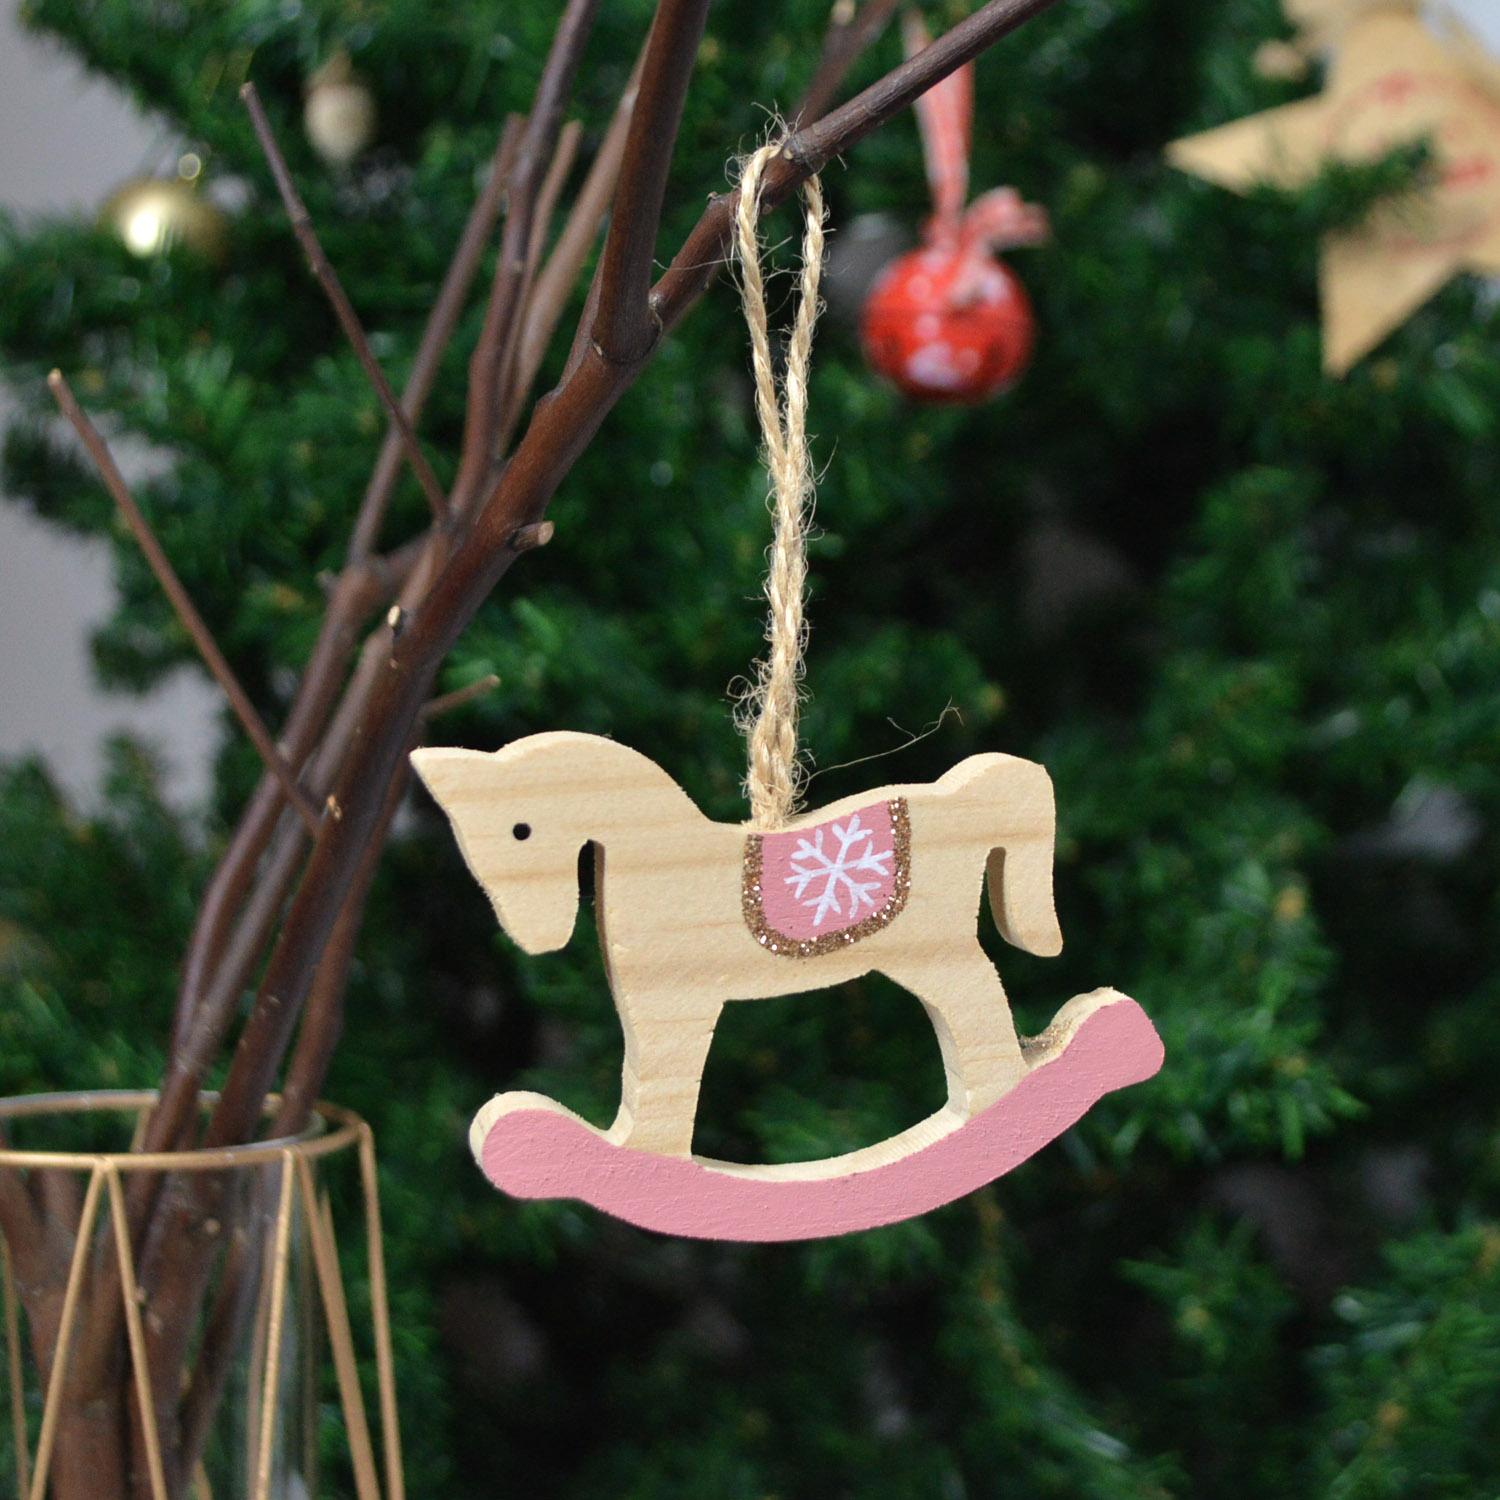 Hot supplies pink Rocking horse hanging unicorn ornaments wooden crafts Kids crafts Christmas tree decor items